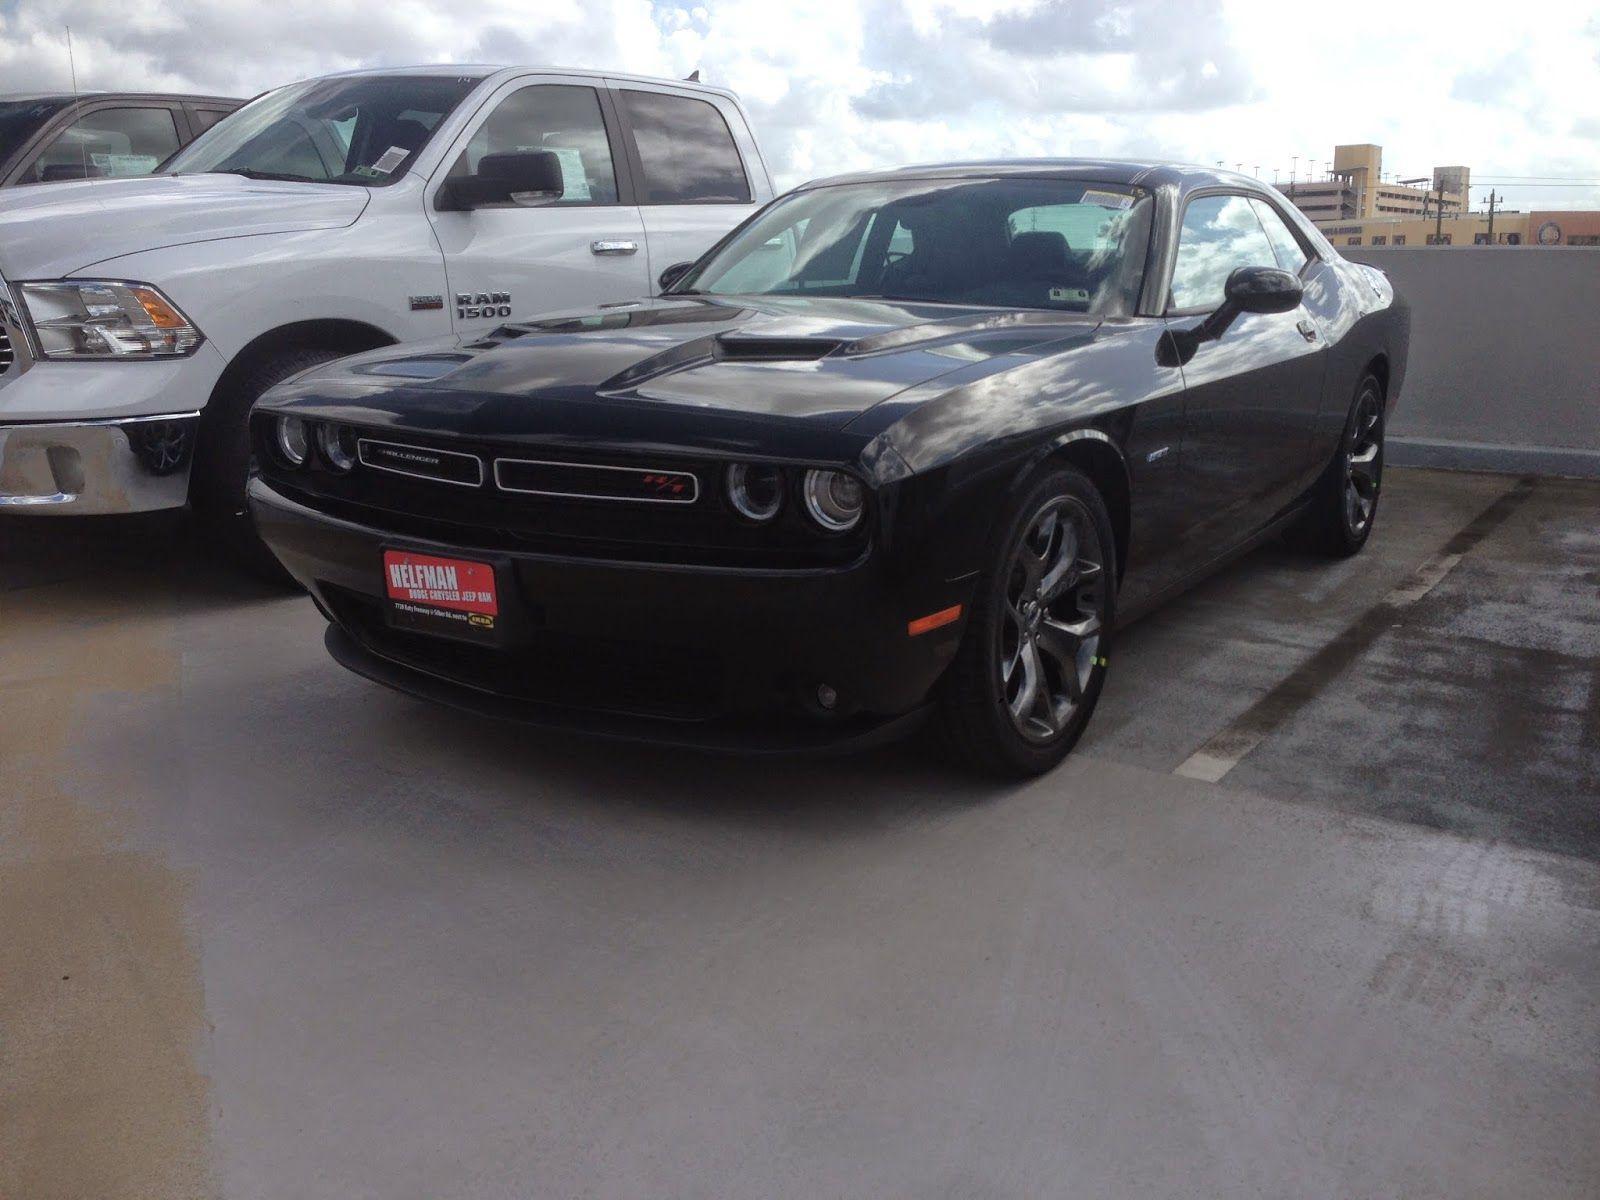 Manic Expression. First Drive: 2015 Dodge Challenger R